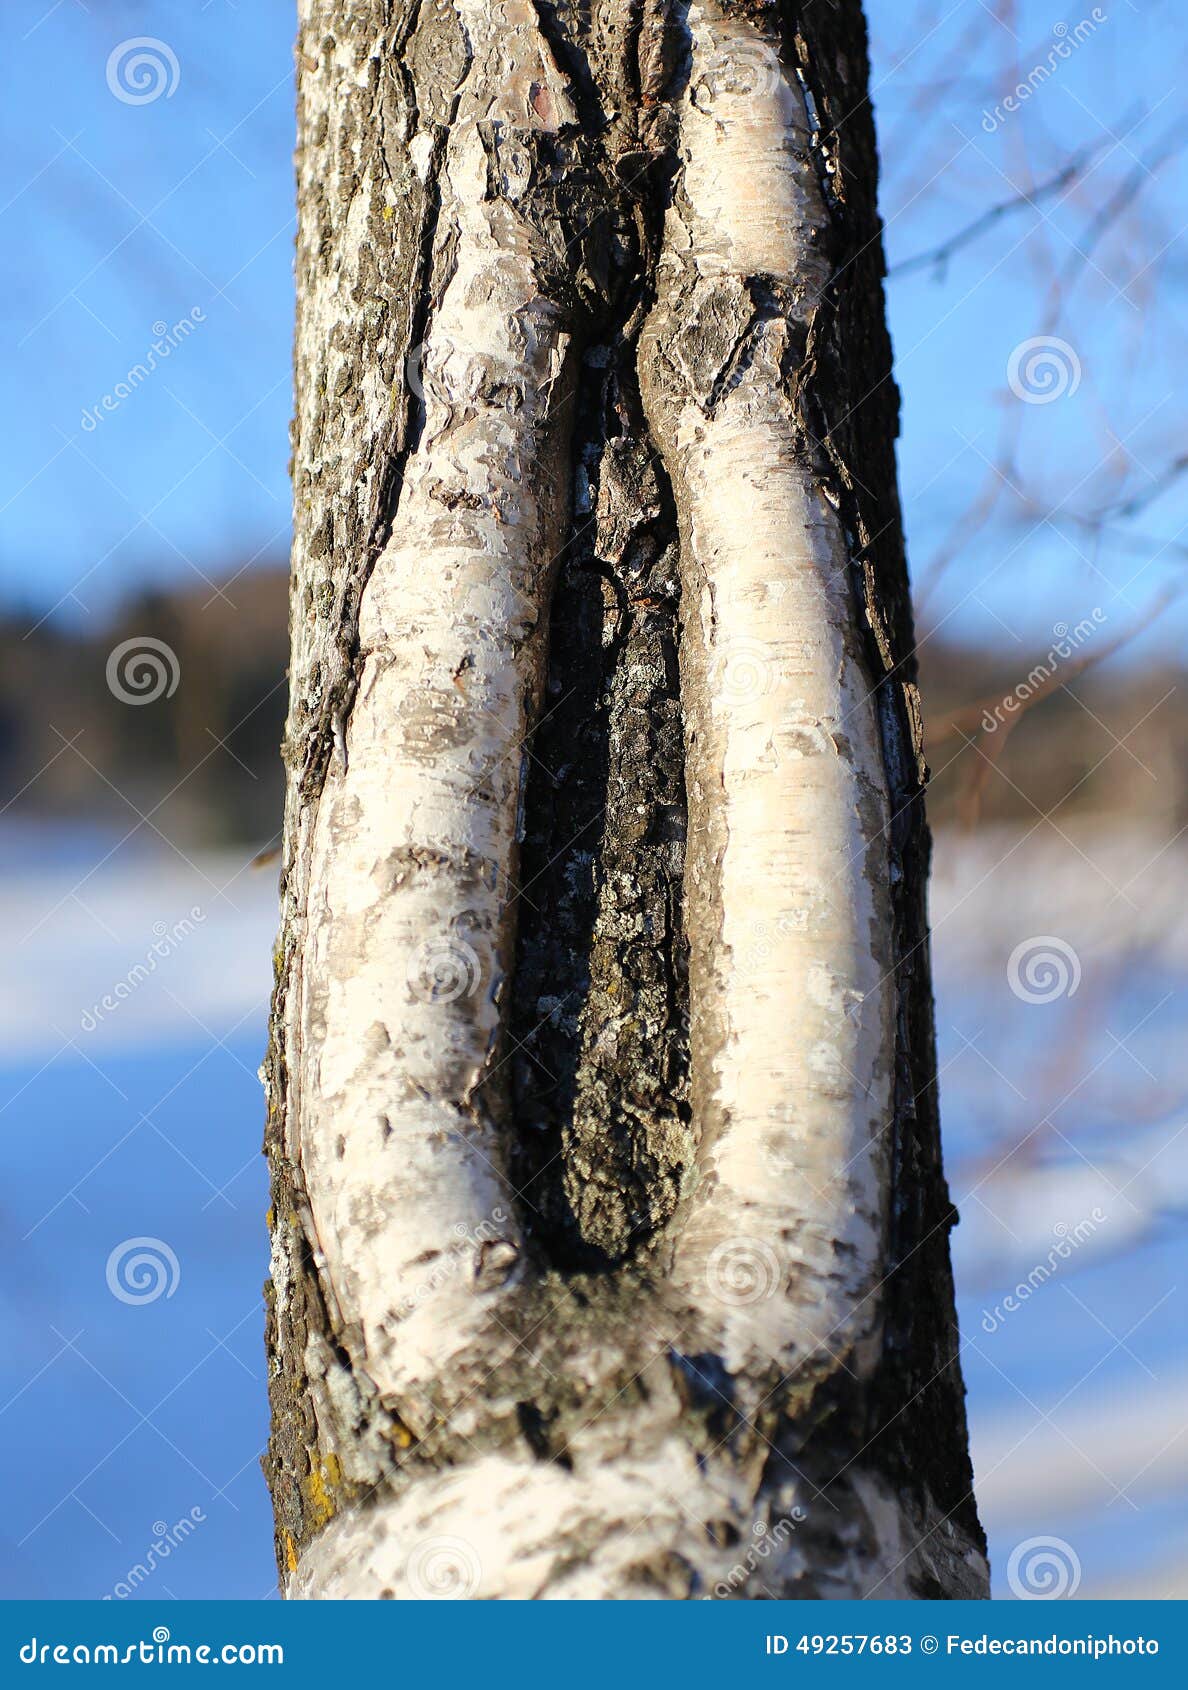 crack in the trunk of the tree like a vagina